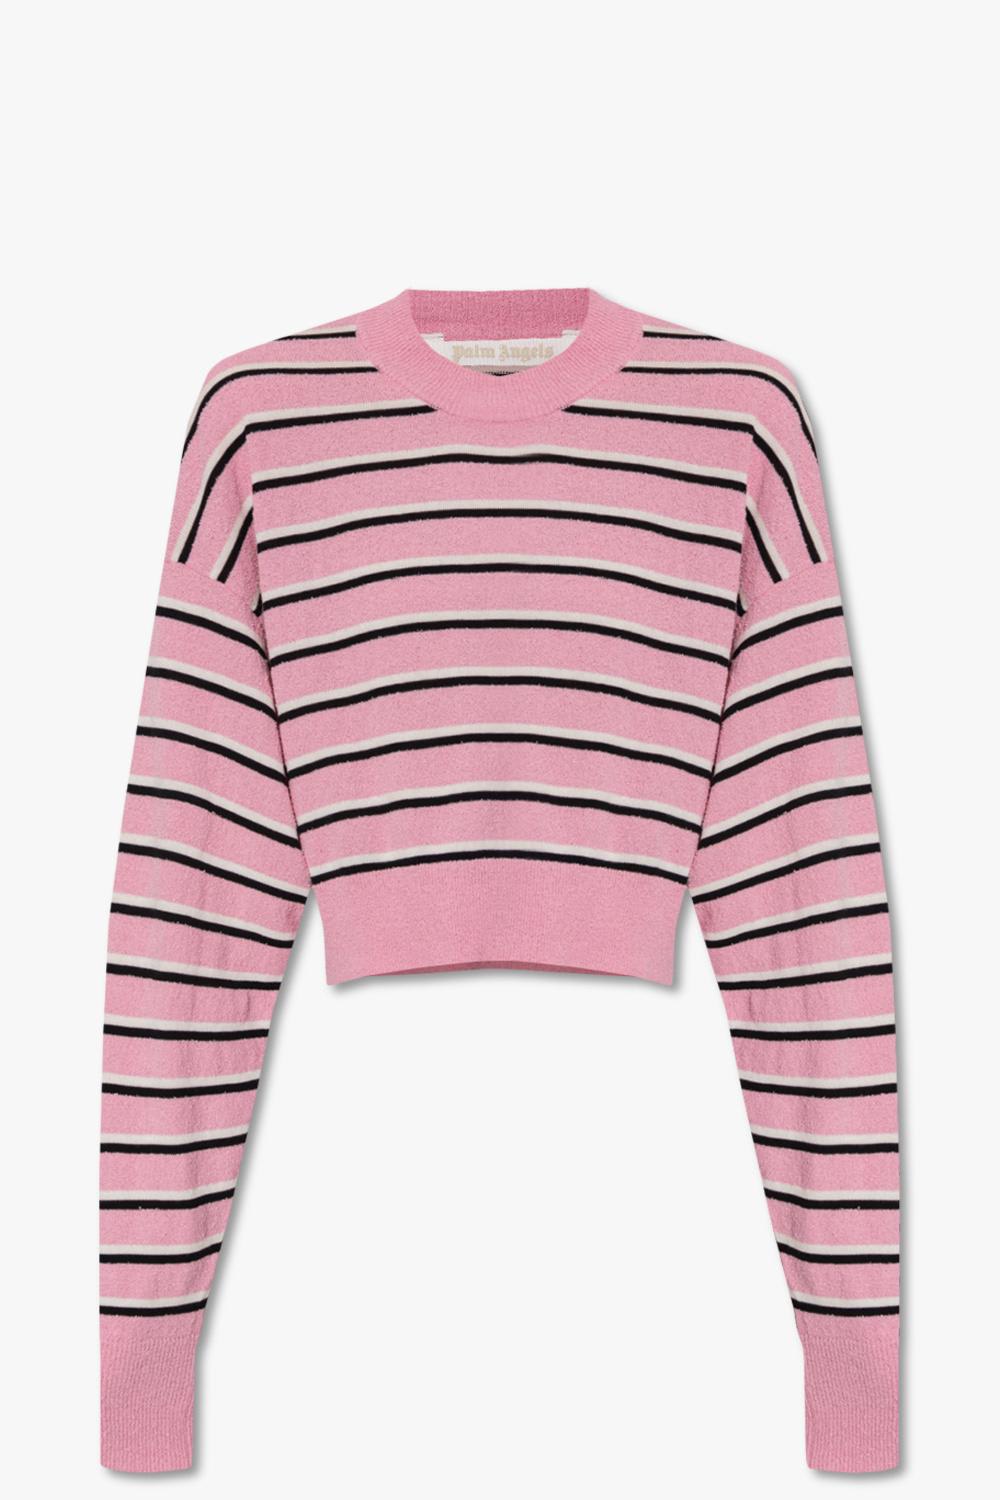 Palm Angels Cropped Sweater With Stripes